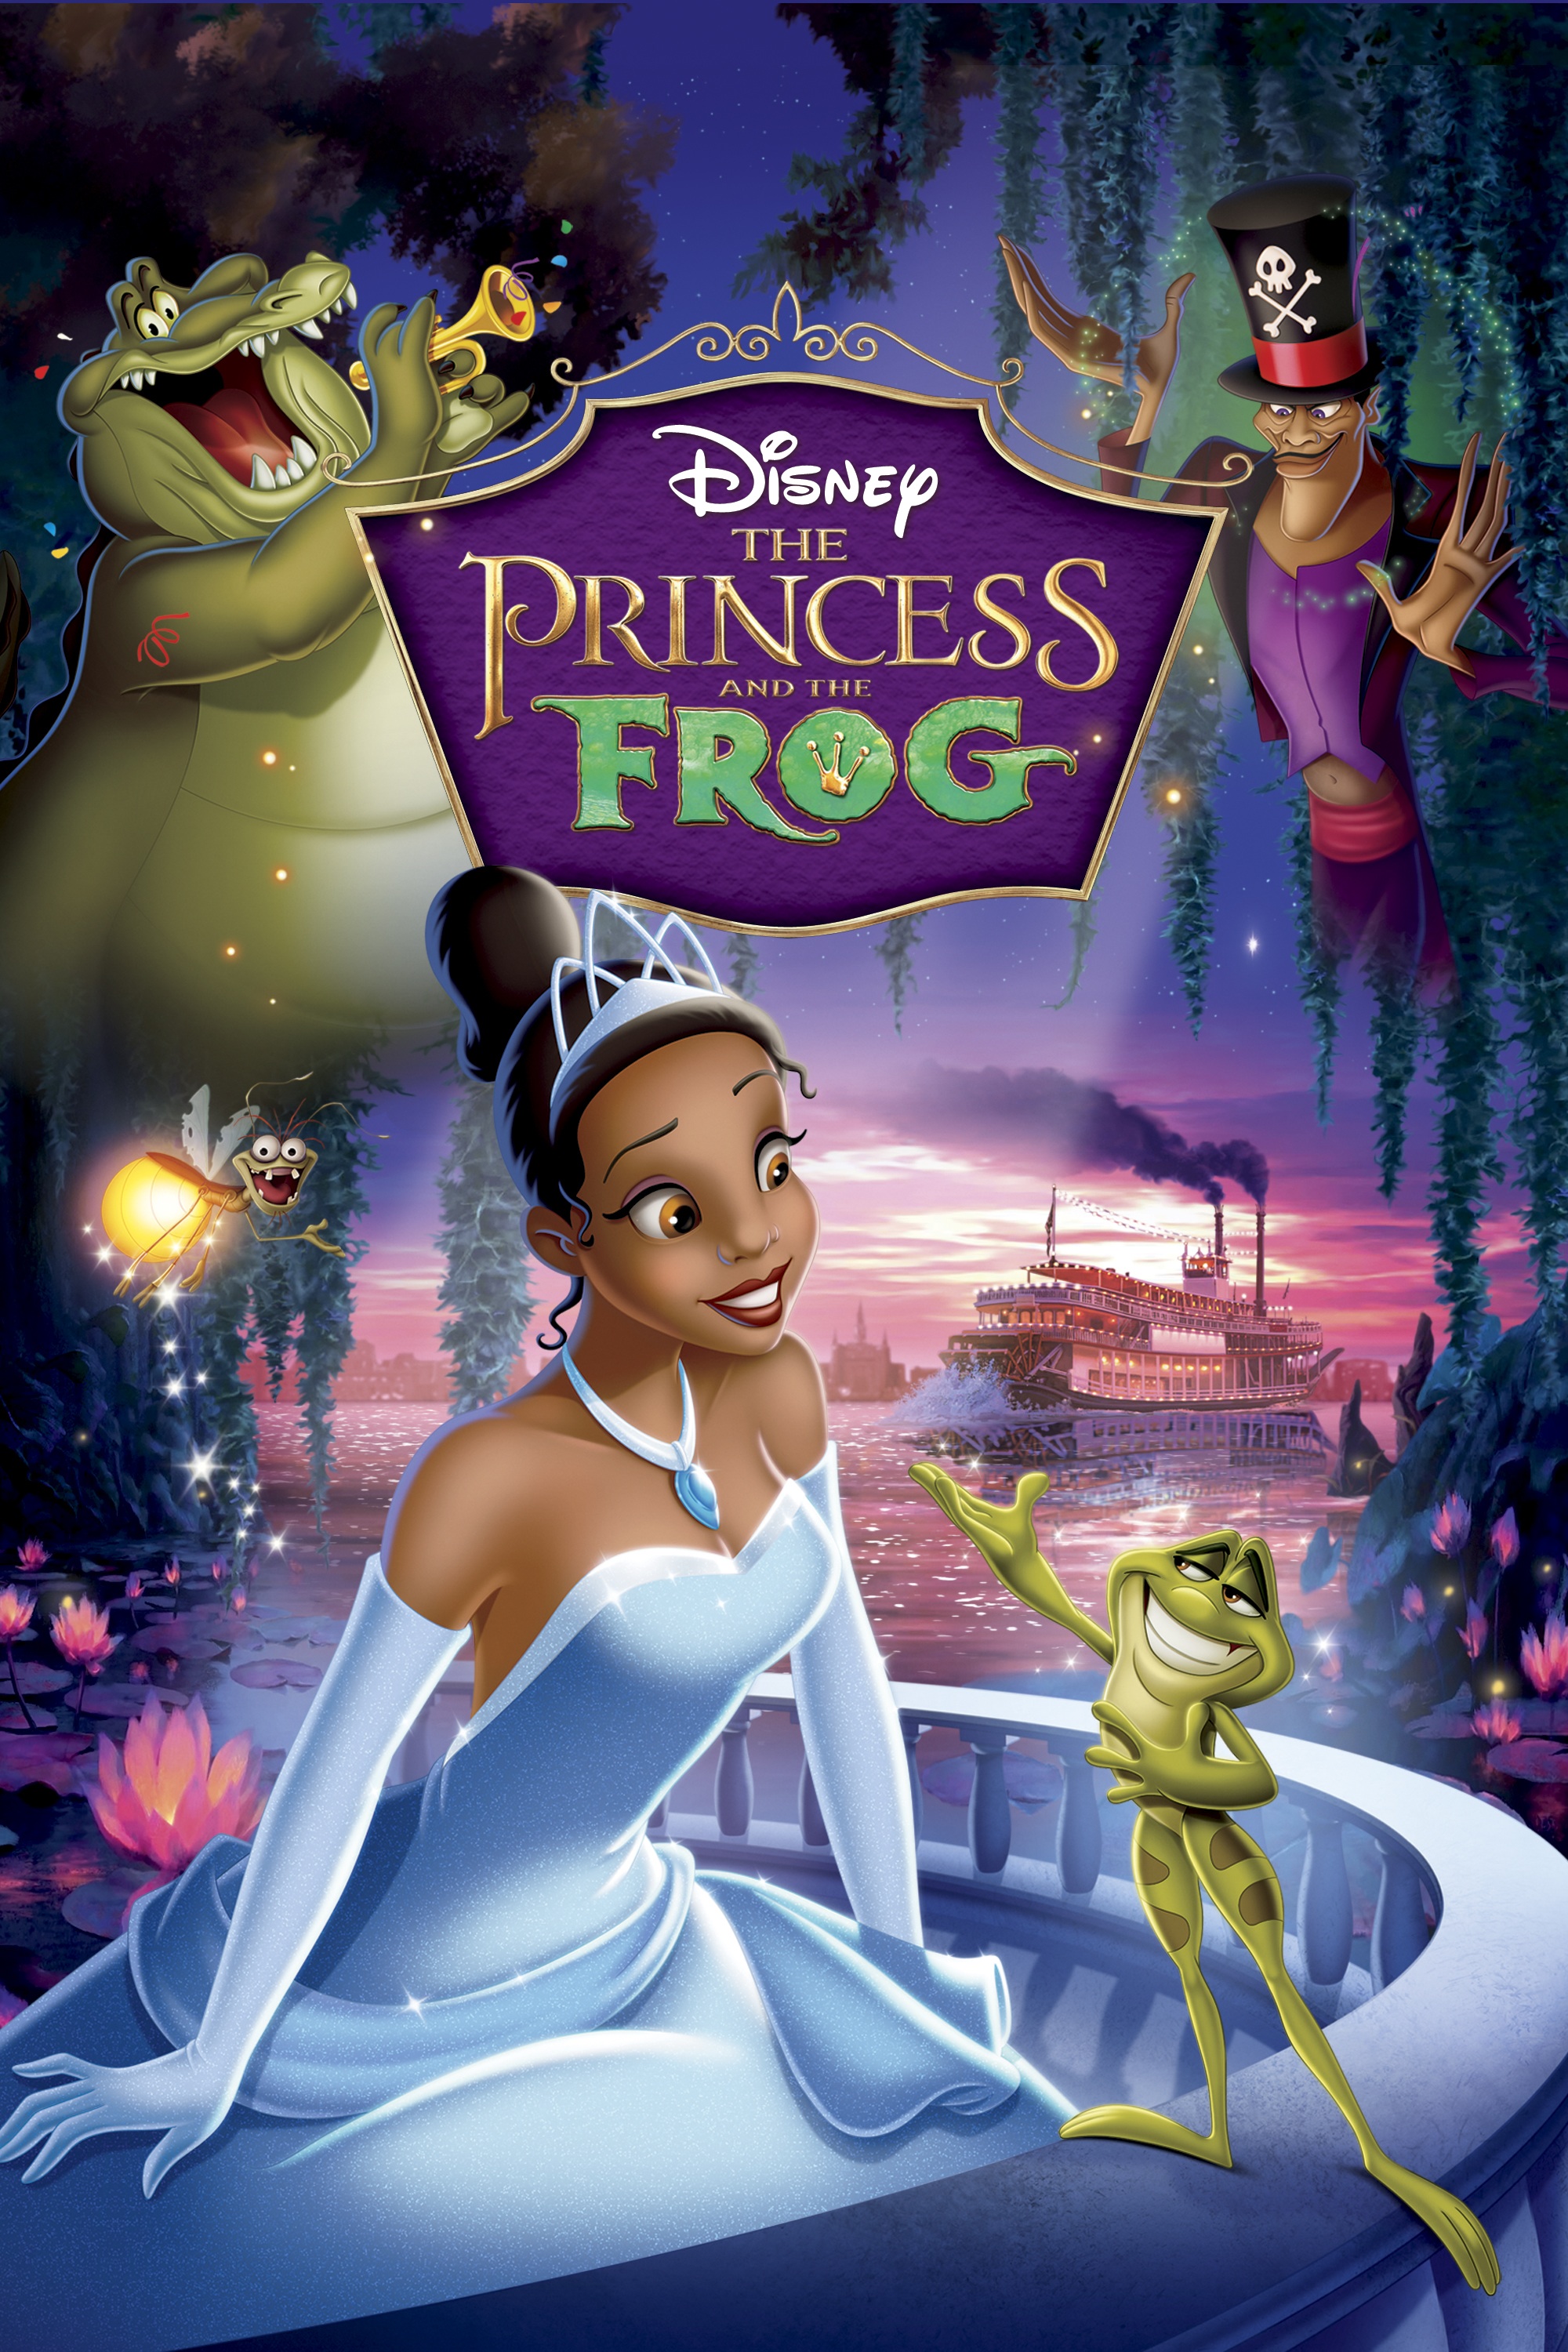 http://images3.wikia.nocookie.net/__cb20120625003634/disney/images/9/90/The-Princess-And-The-Frog-poster.jpg